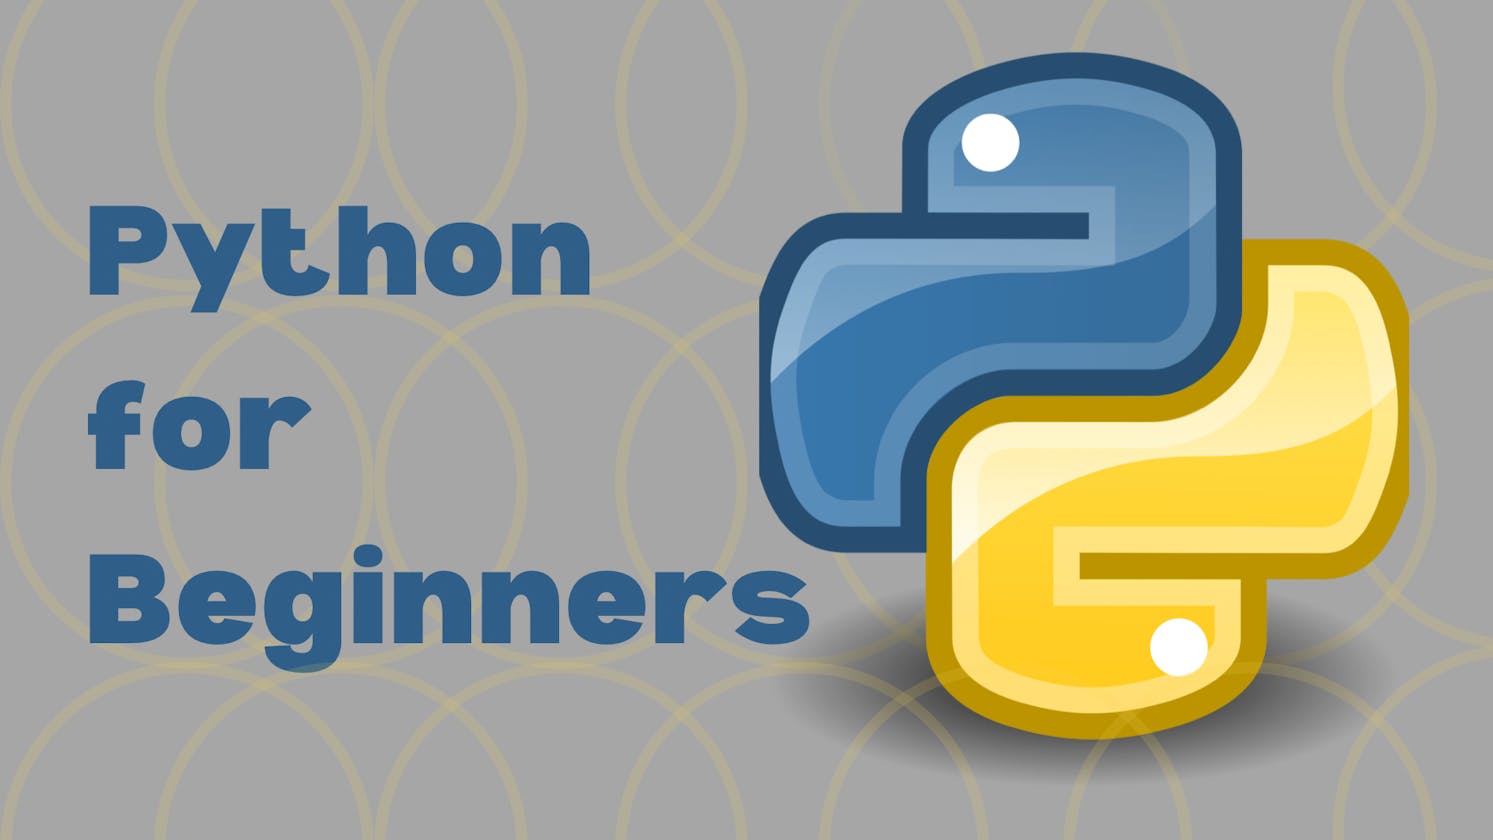 A Beginner's Guide to Python; Set up and know the basics